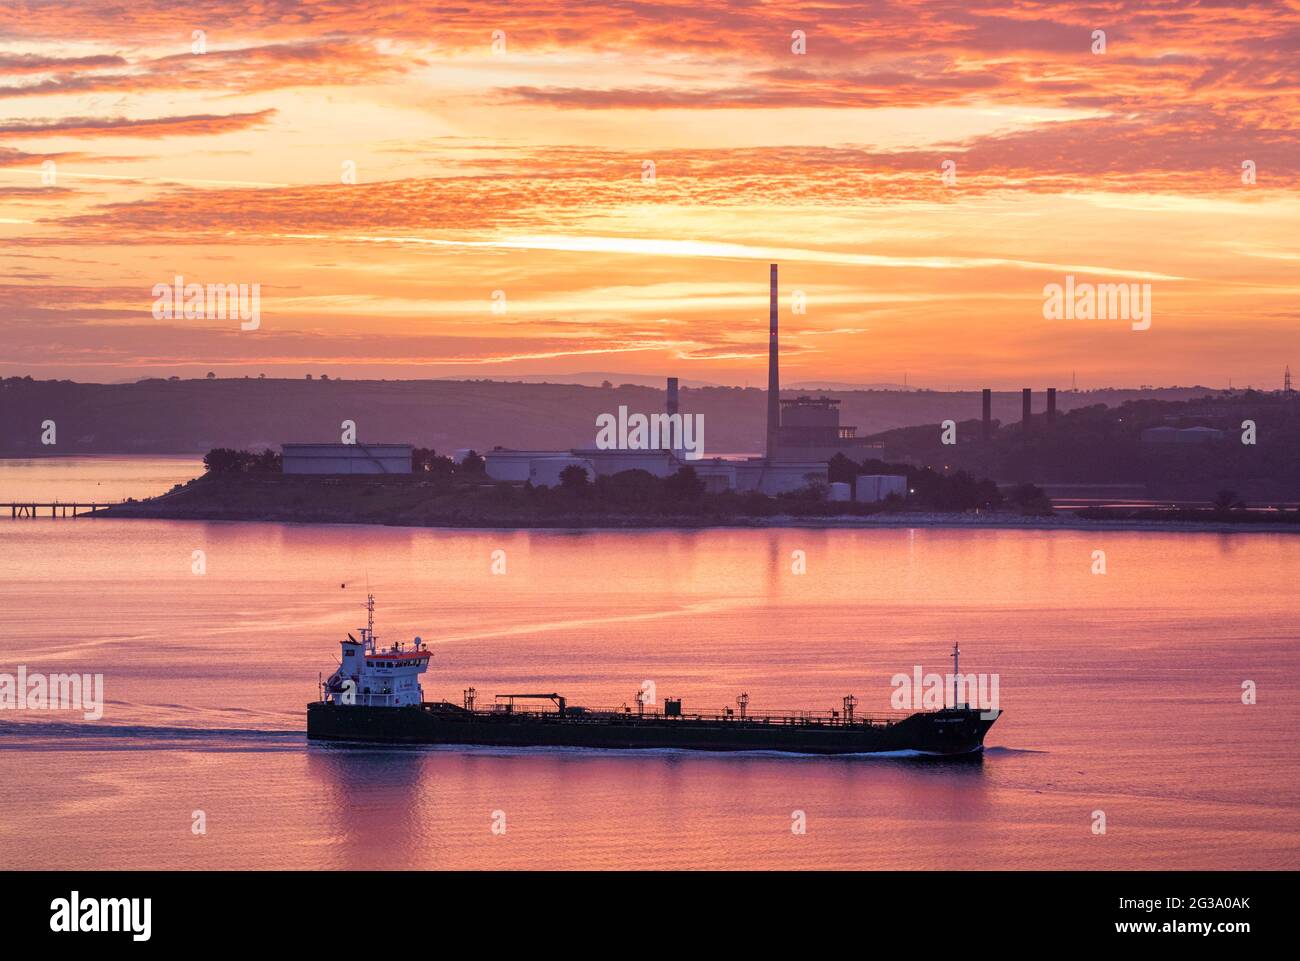 Whitegate, Cork, Ireland. 15th June, 2021.Oil tanker Thun Gemini passes the ESB generating Station in Aghada as she steams out of Cork Harbour bound for Dublin before sunrise. - Credit; David Creedon / Alamy Live News Stock Photo